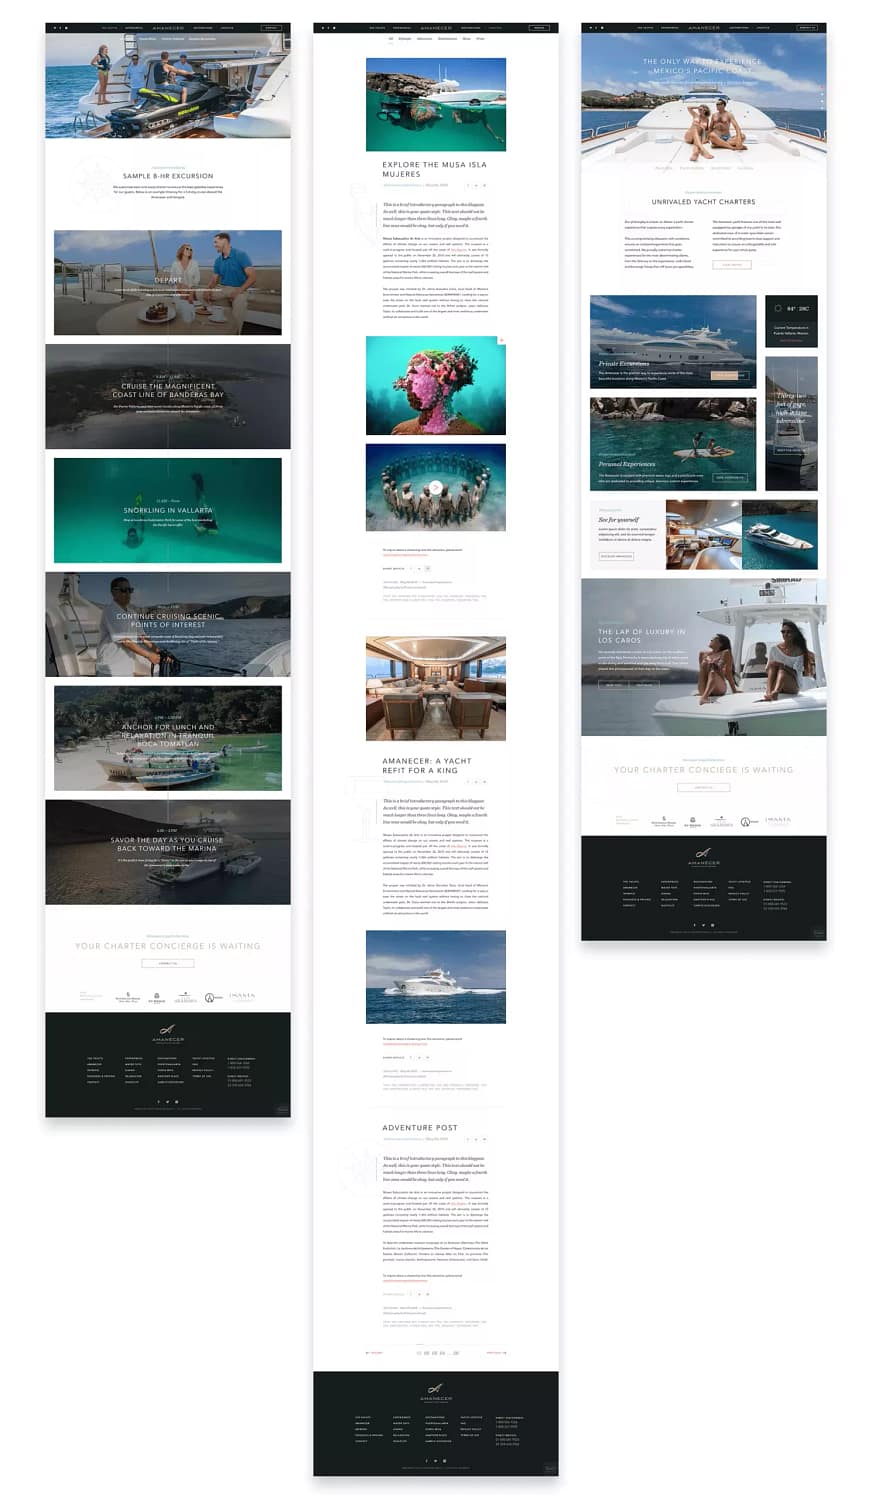 Three screenshots of the Amanecer Yacht Charters website